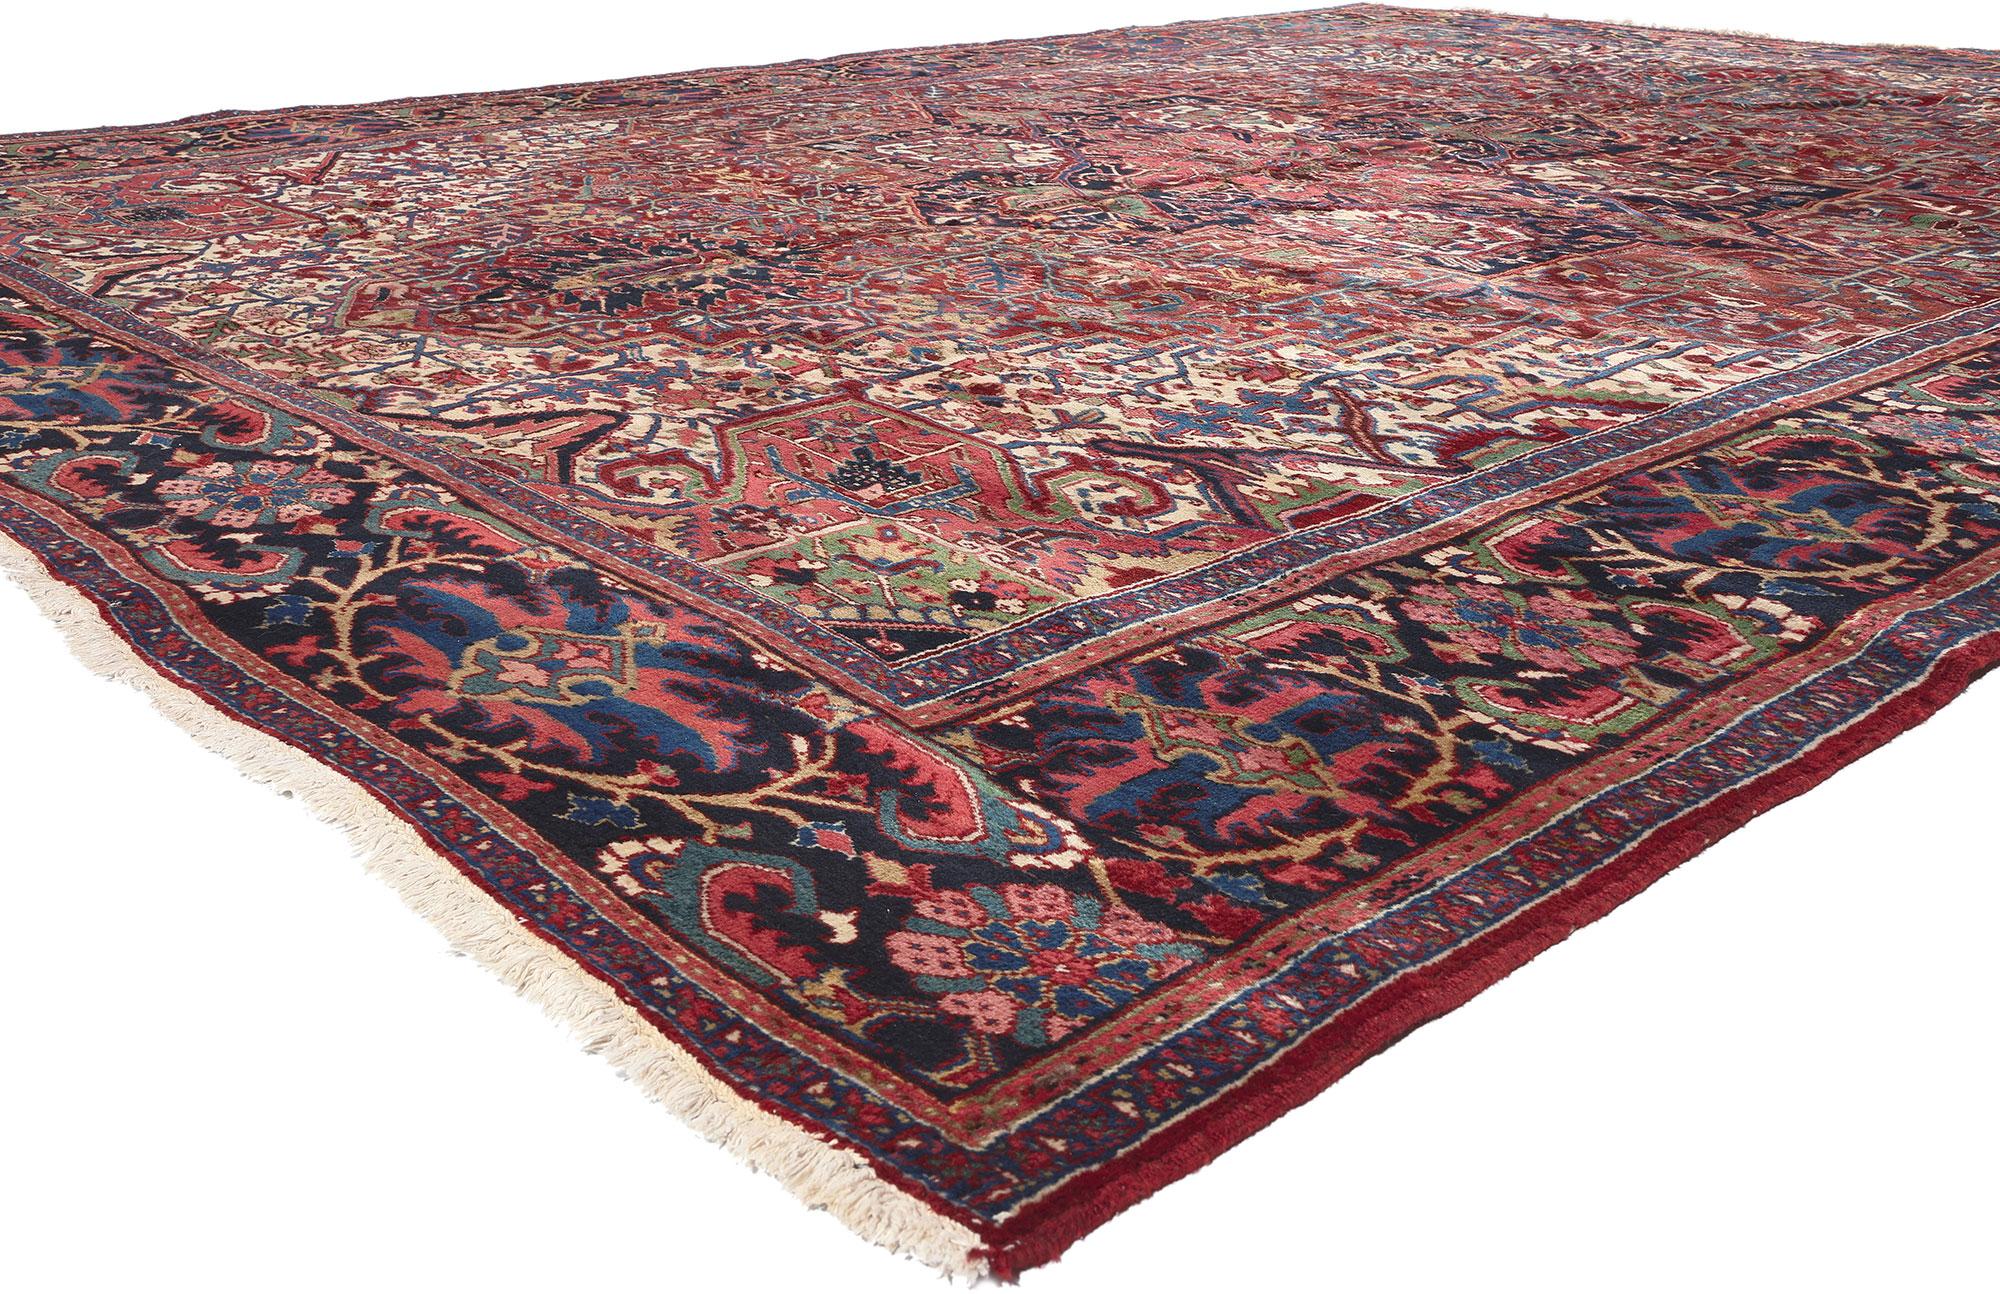 78341 Antique Persian Heriz Rug, 11'04 x 15'00. Heriz rugs, crafted in northwestern Iran, are renowned for their distinctive features. Produced in the village of Heris, nestled on the slopes of Mount Sabalan, these Persian rugs are characterized by